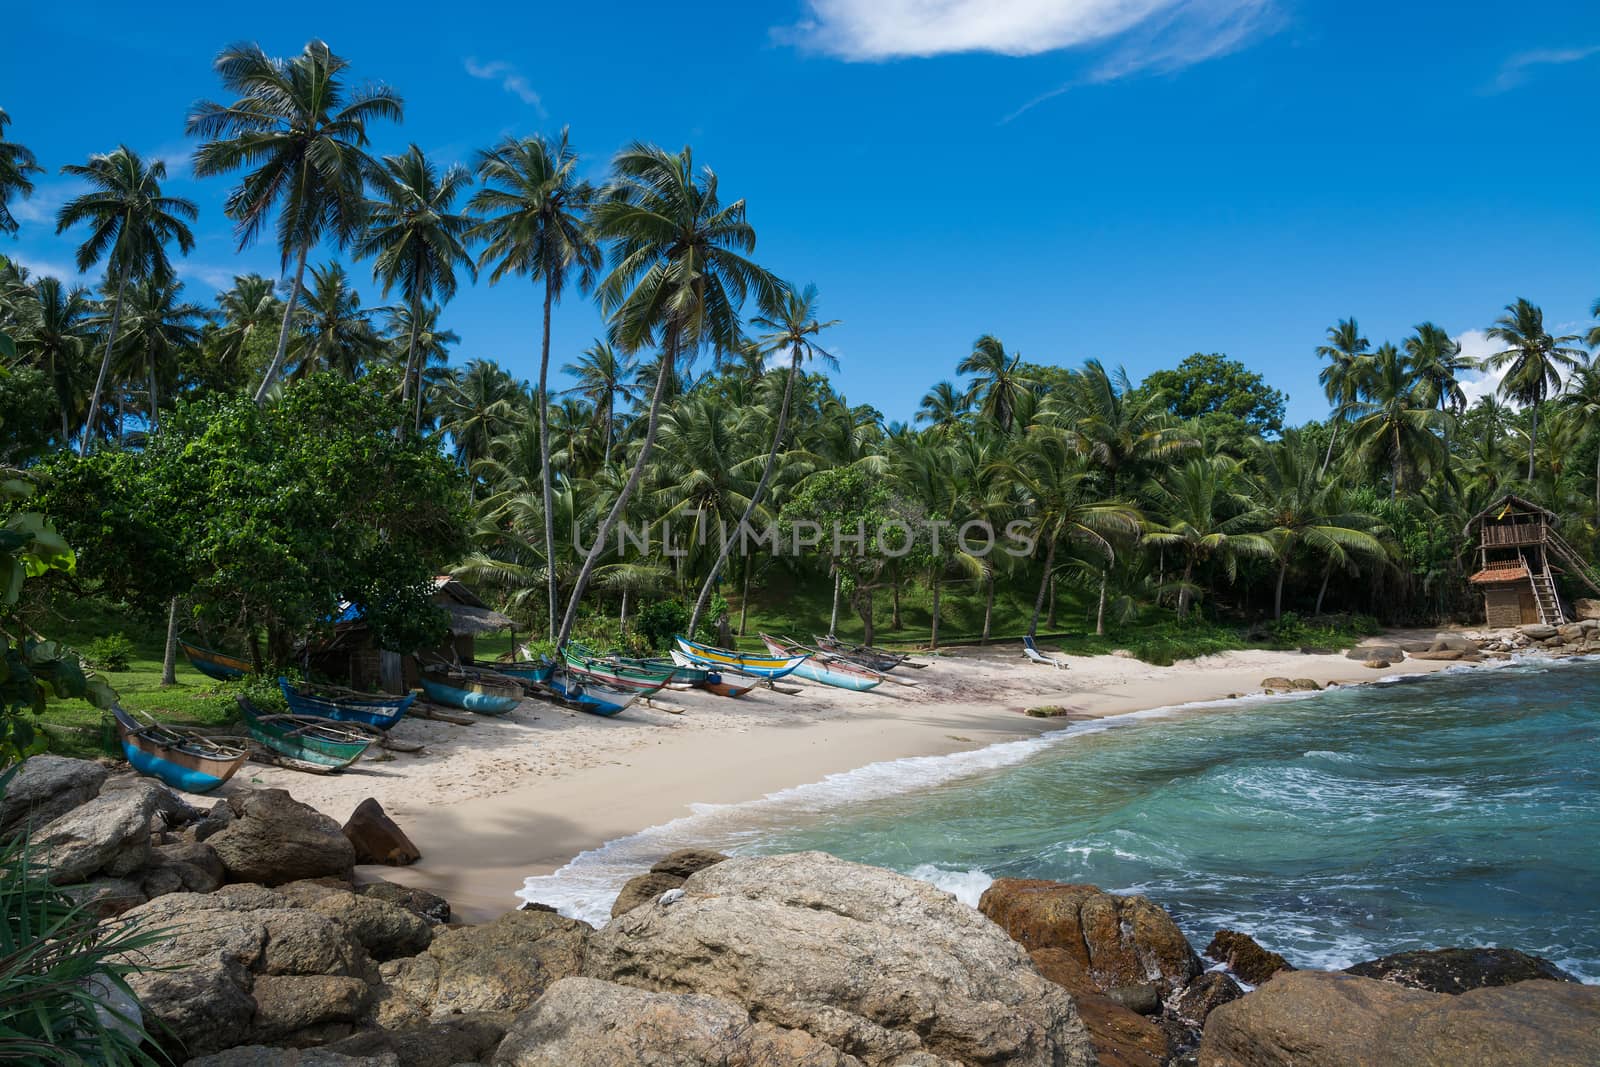 Tropical rocky beach with coconut palm trees, sandy beach and traditional fishing boats. Rocky Point, Tangalle, Southern Province, Sri Lanka, Asia.